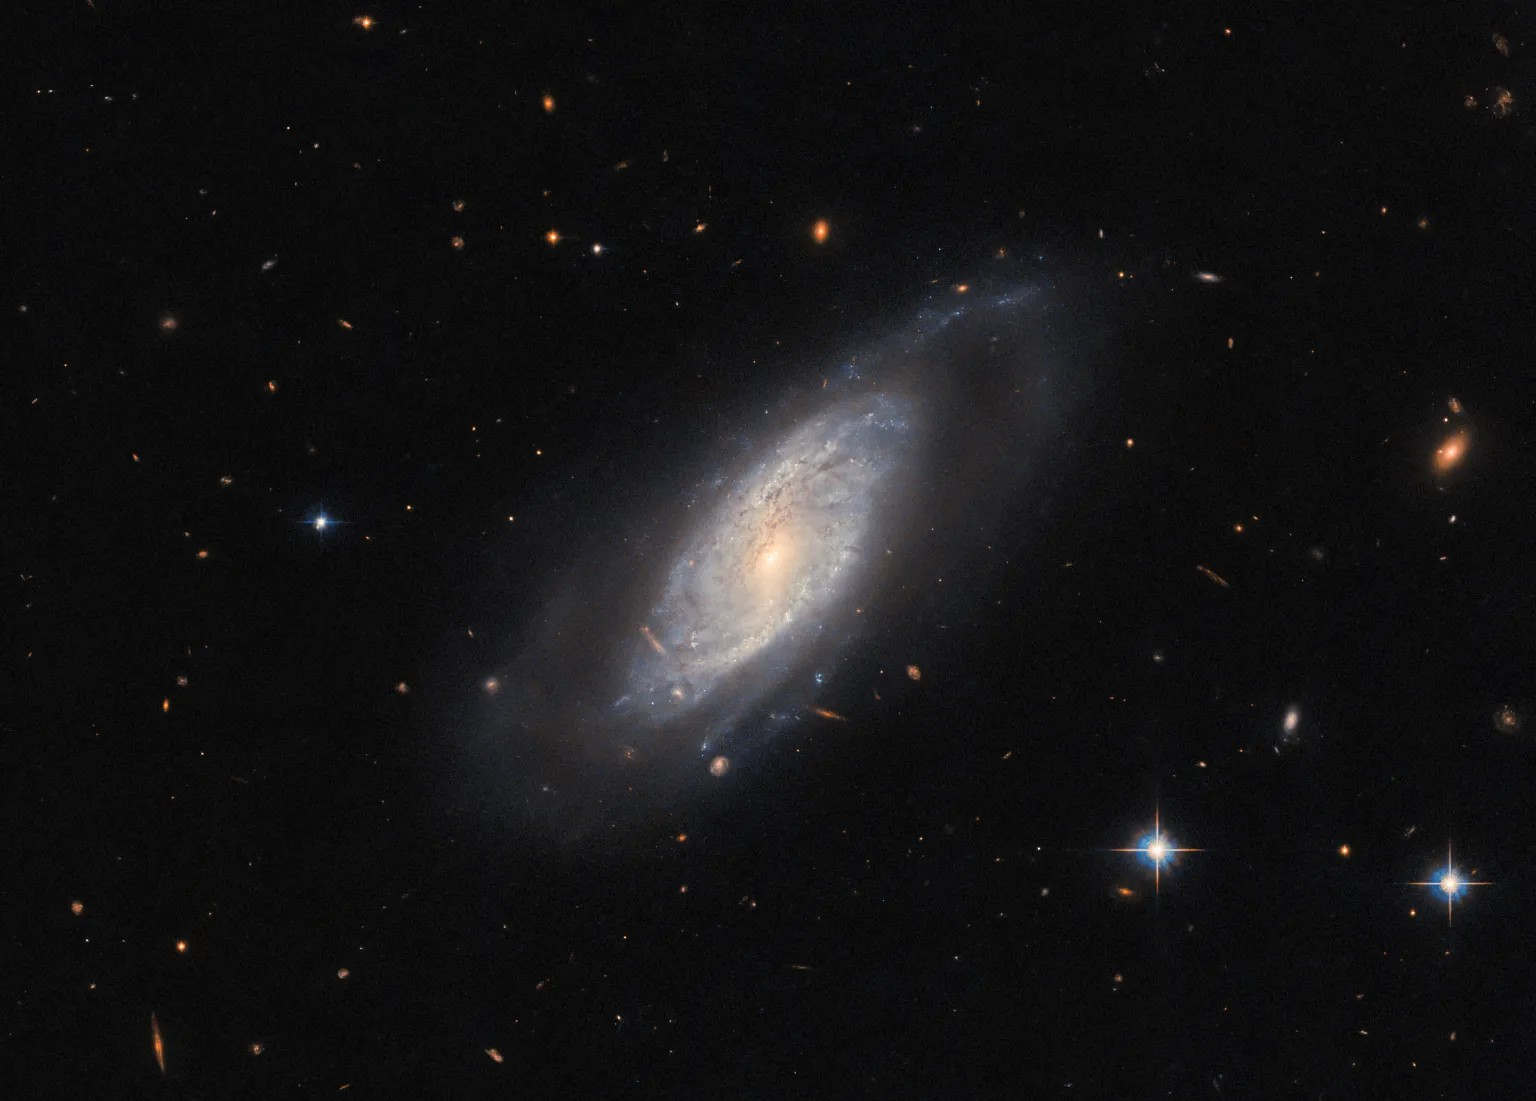 This image from the NASA/ESA Hubble Space Telescope highlights the spiral galaxy UGC 9684.